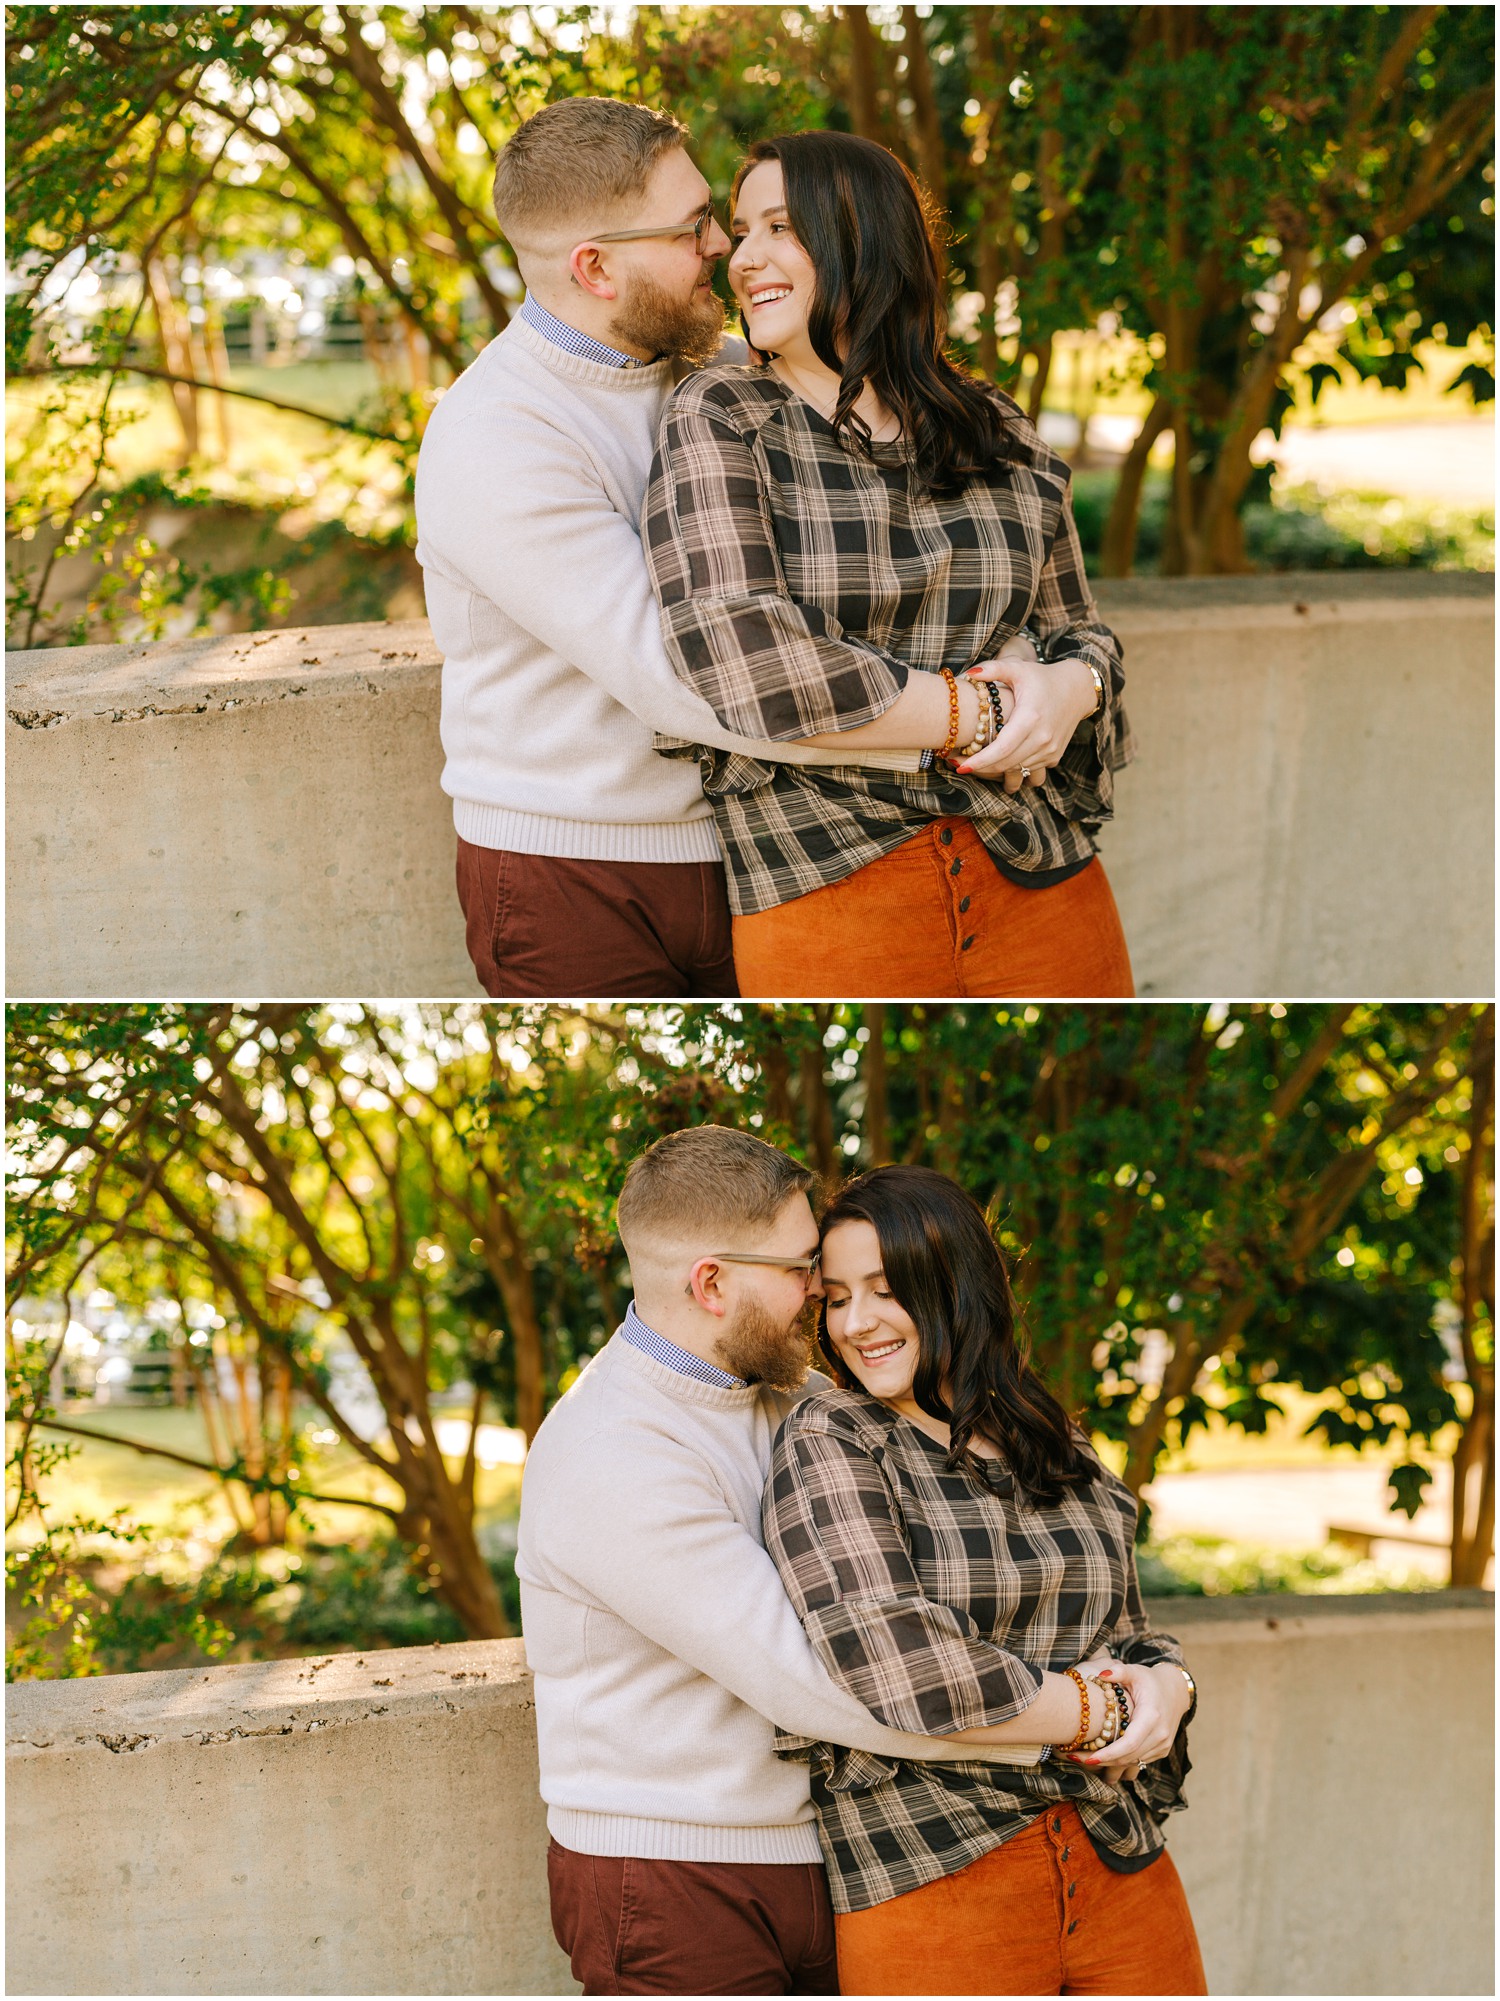 engagement session with fall outfits full of orange and browns